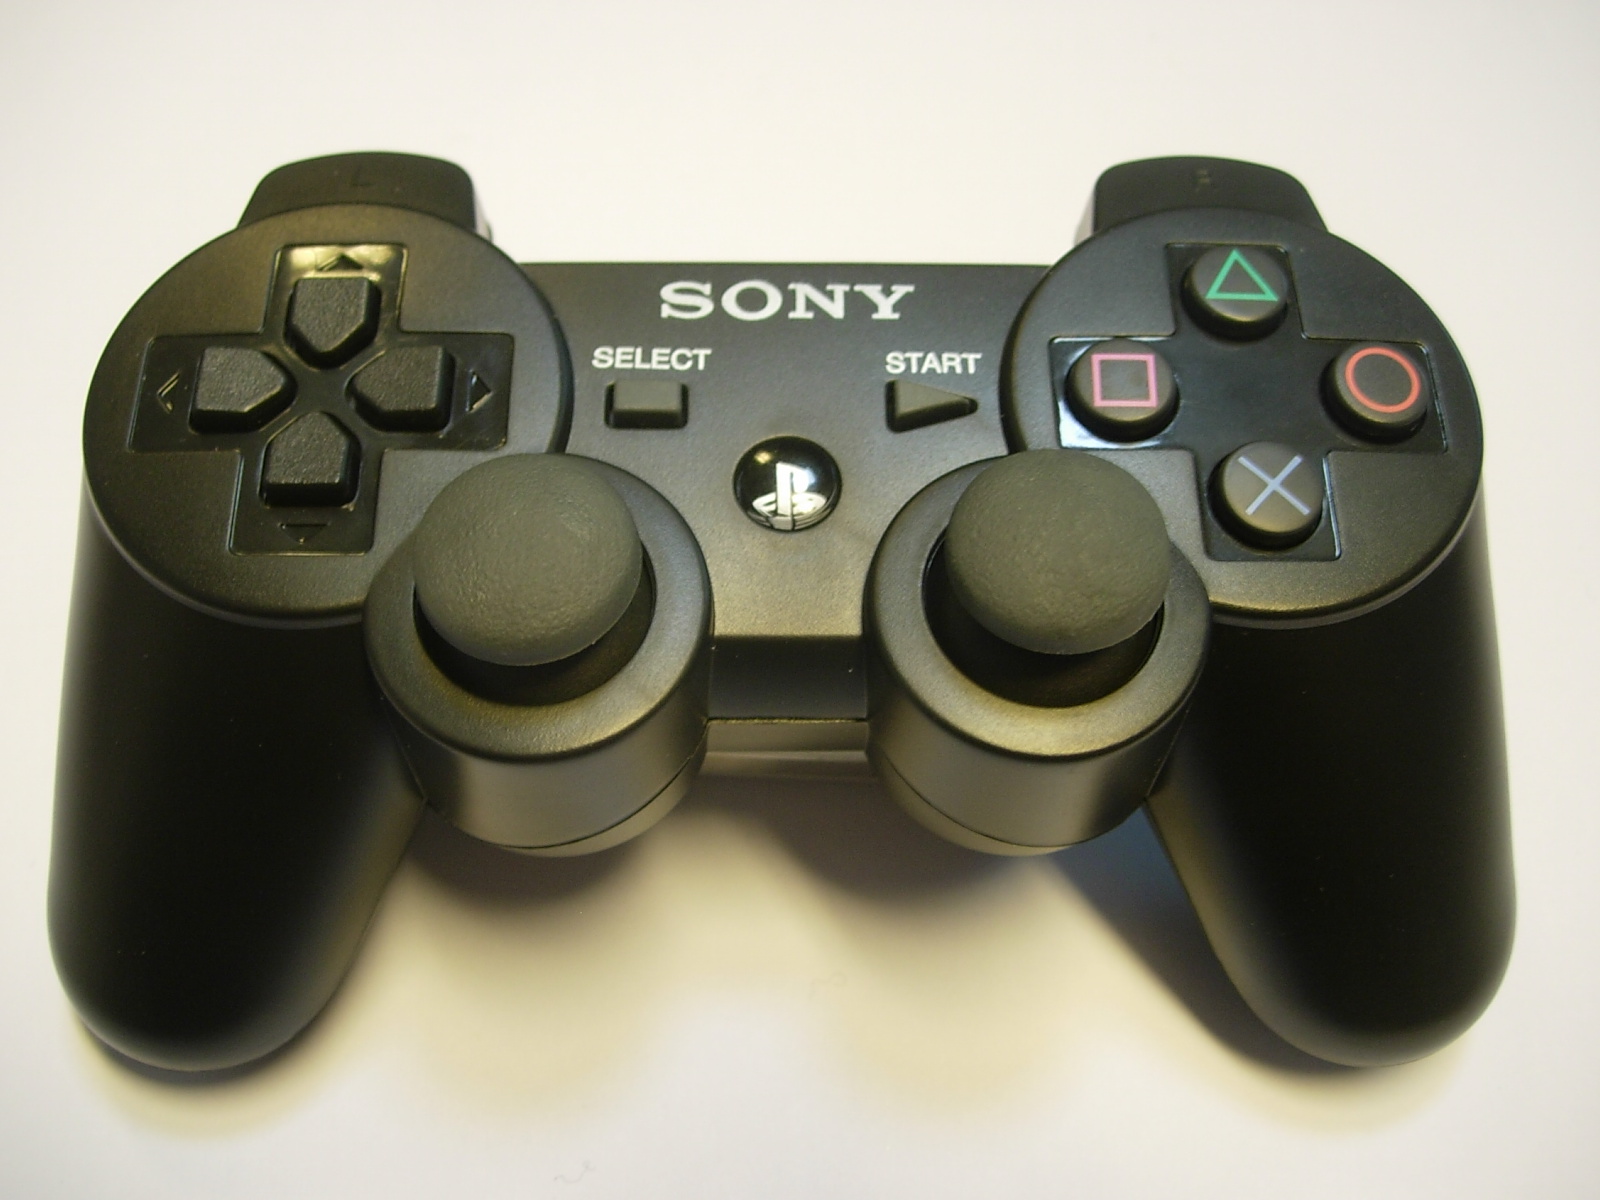 two game controller's on a white background